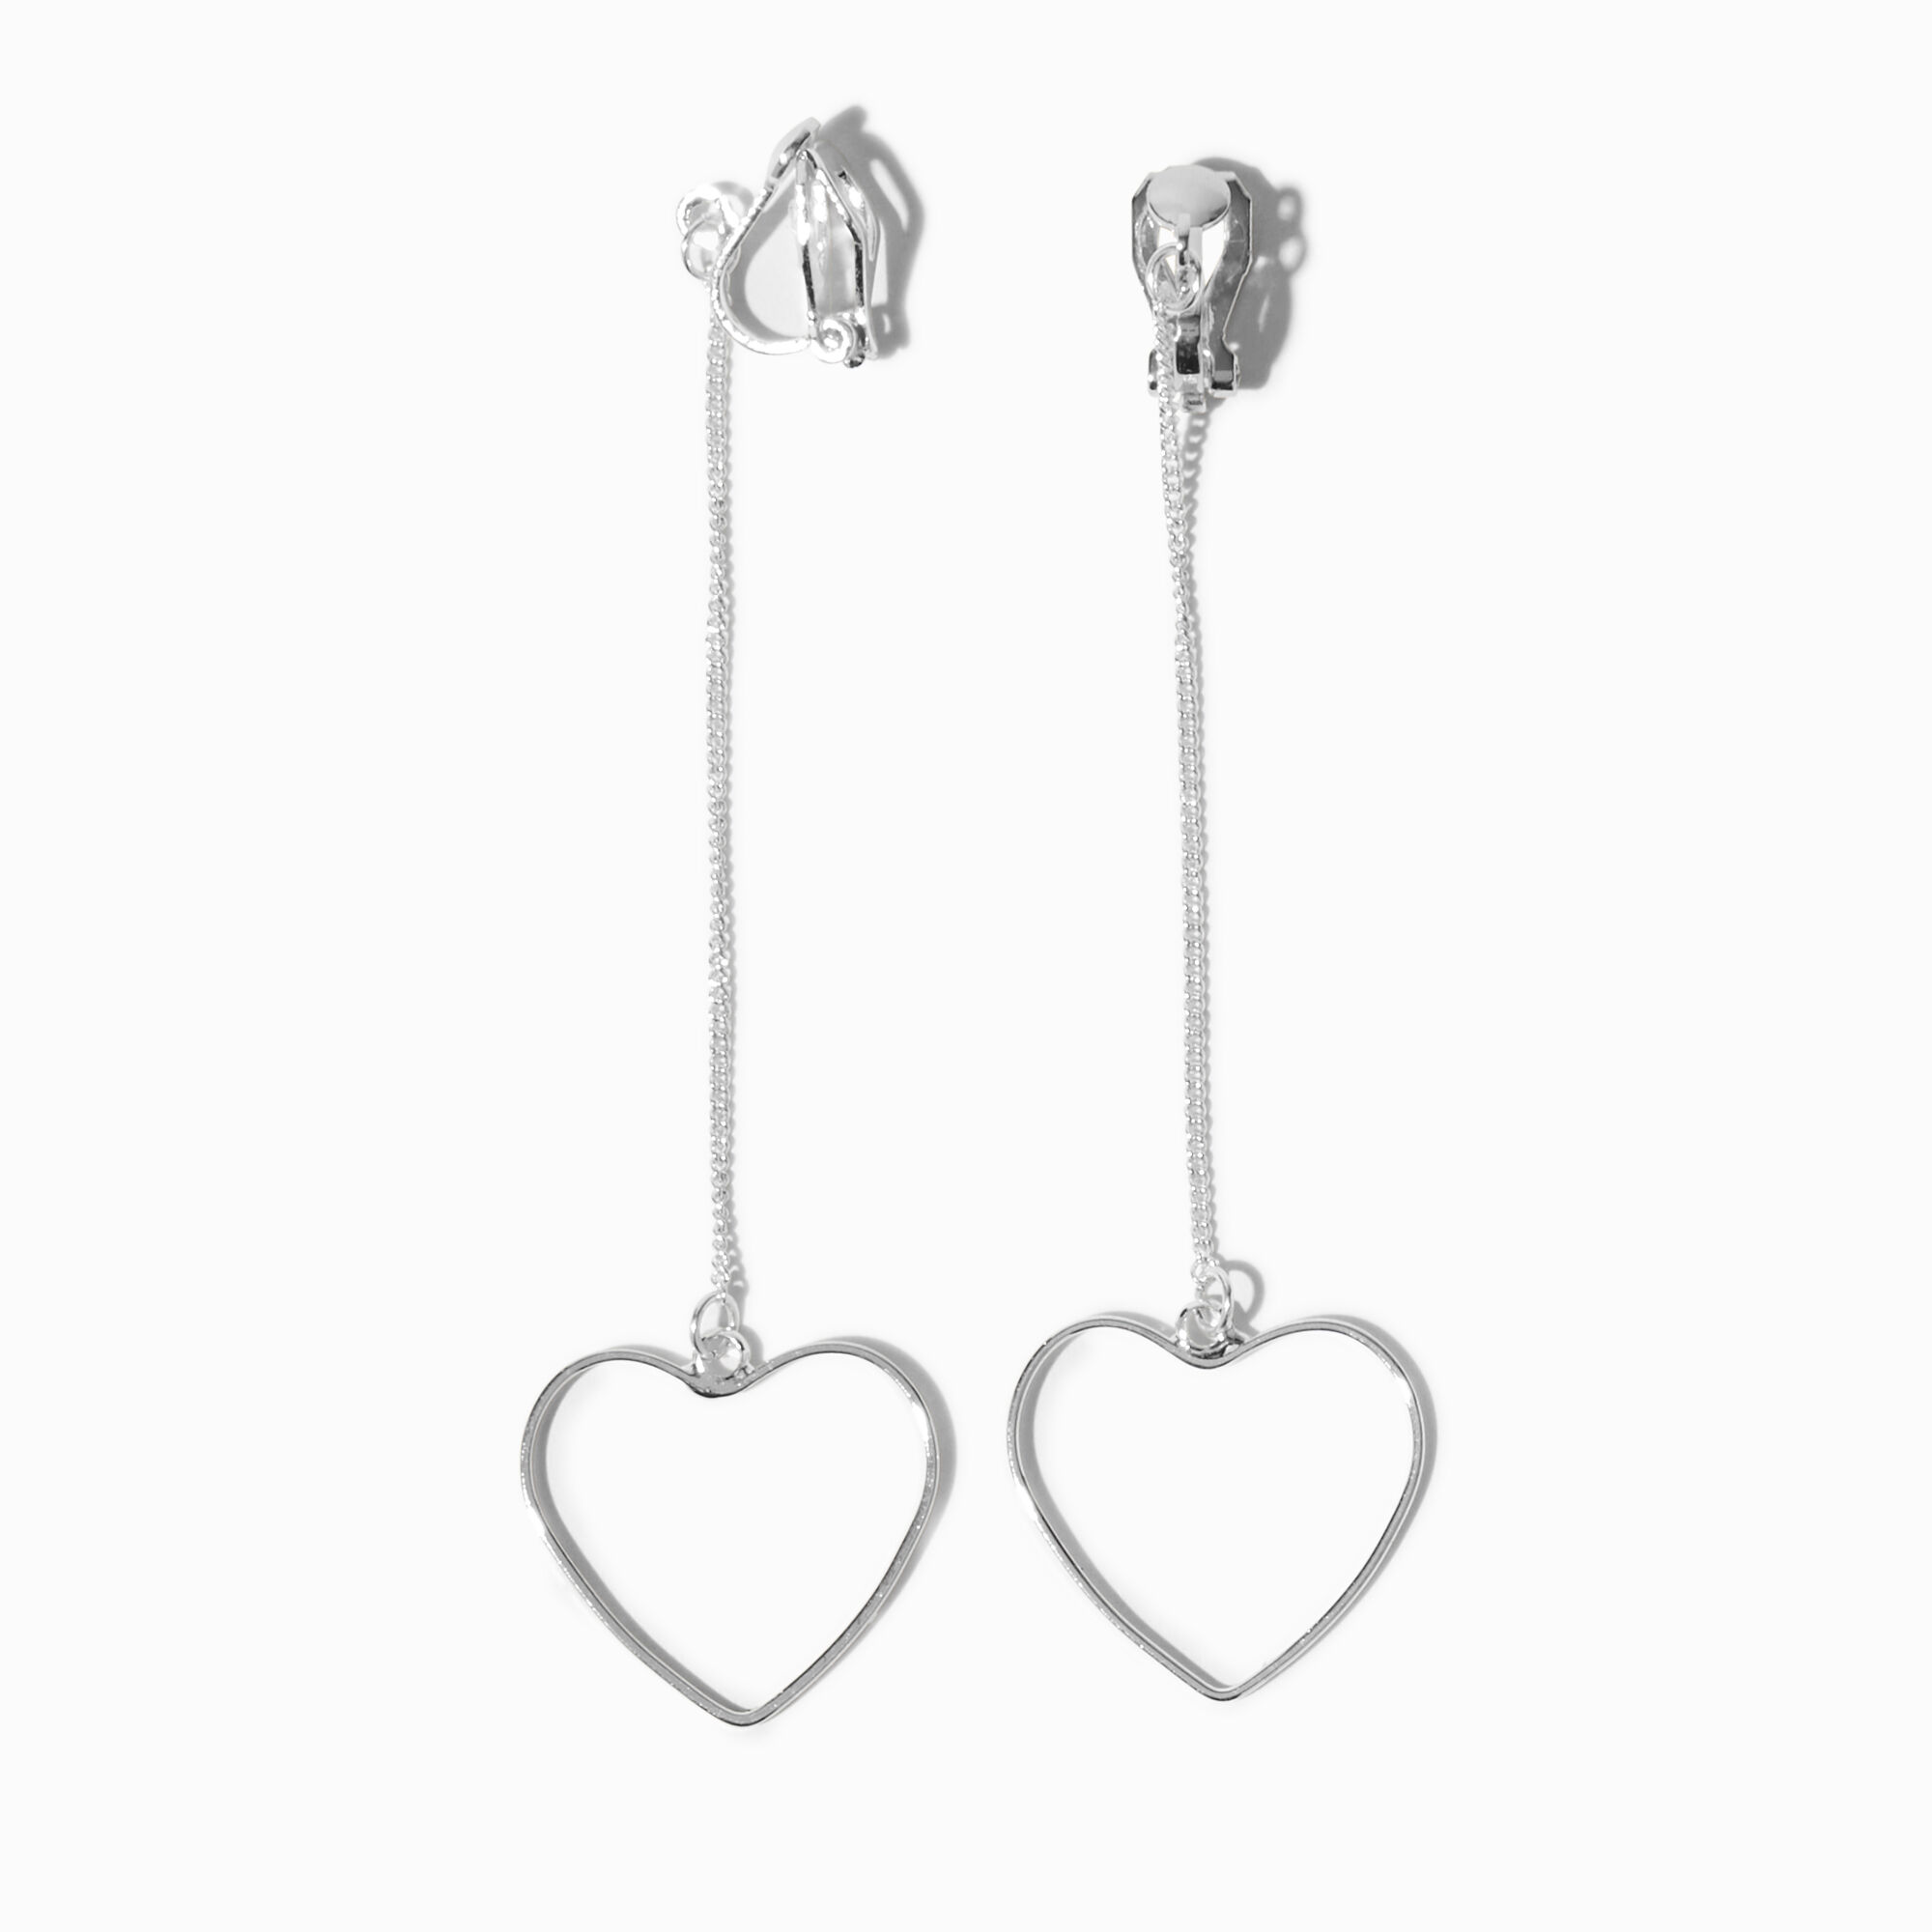 View Claires 3 Heart Linear ClipOn Drop Earrings Silver information